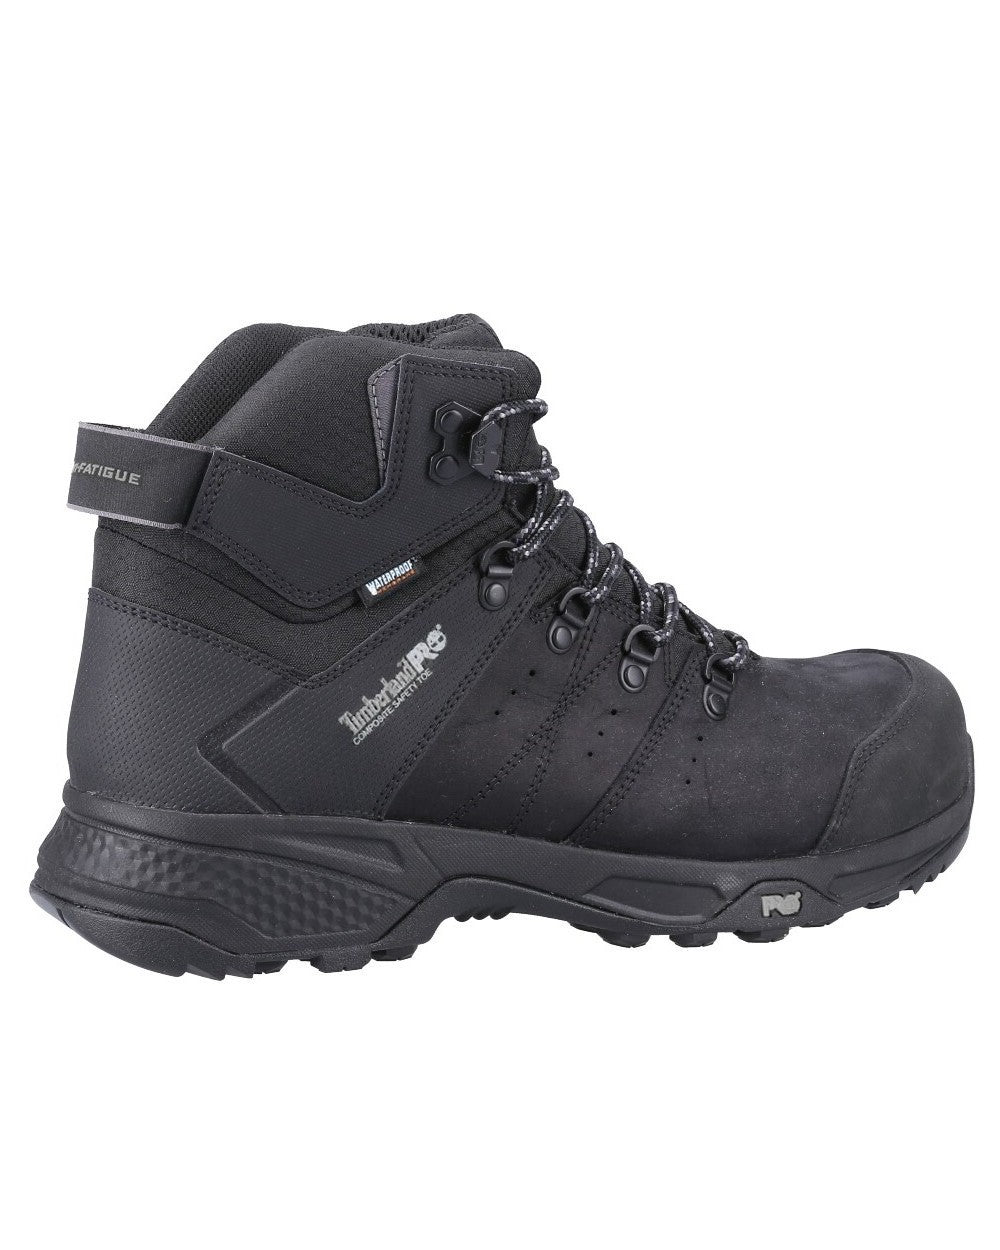 Black coloured Timberland Pro Switchback Work Boots on white background 